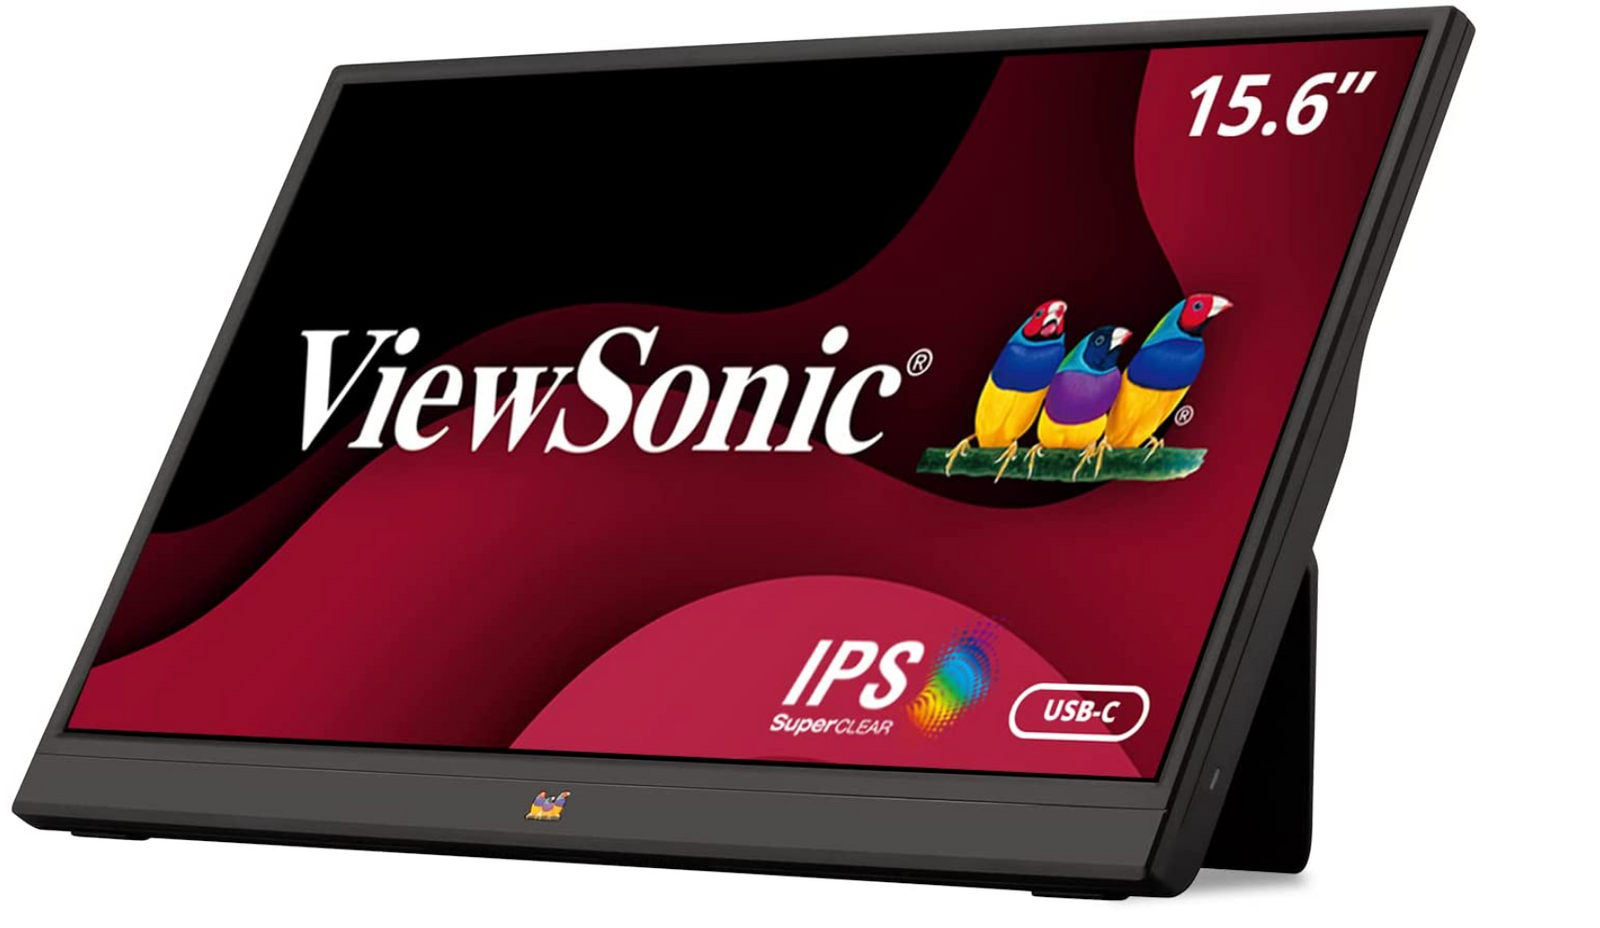 ViewSonic VA1655 product image of a black foldable monitor with a red pattern on the display as well as ViewSonic branding.